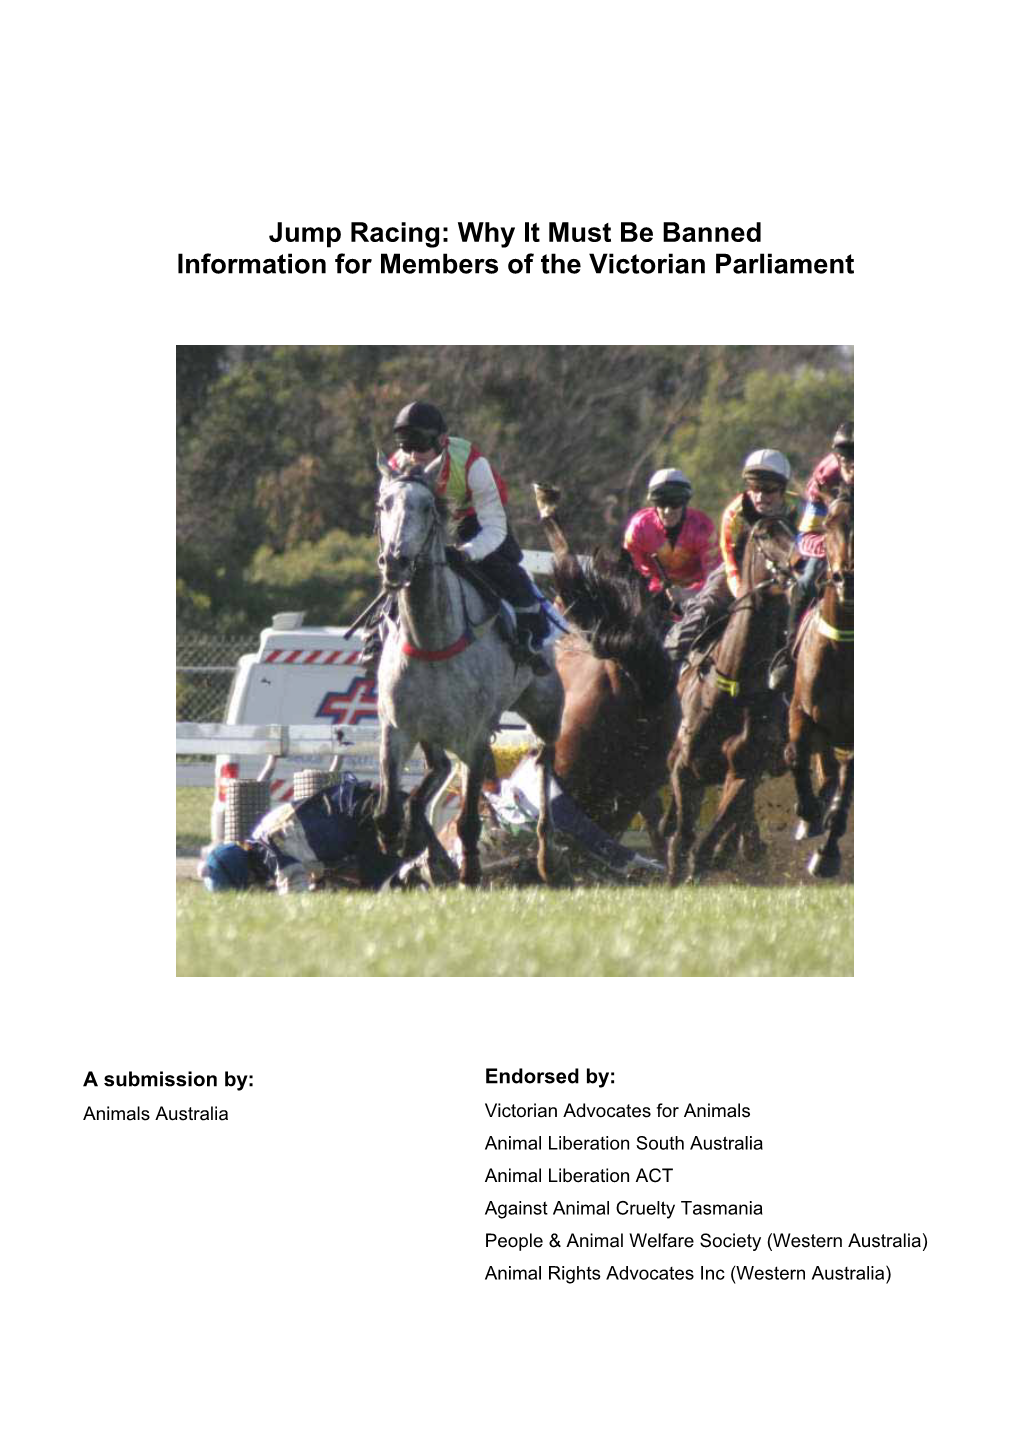 Jump Racing: Why It Must Be Banned Information for Members of the Victorian Parliament